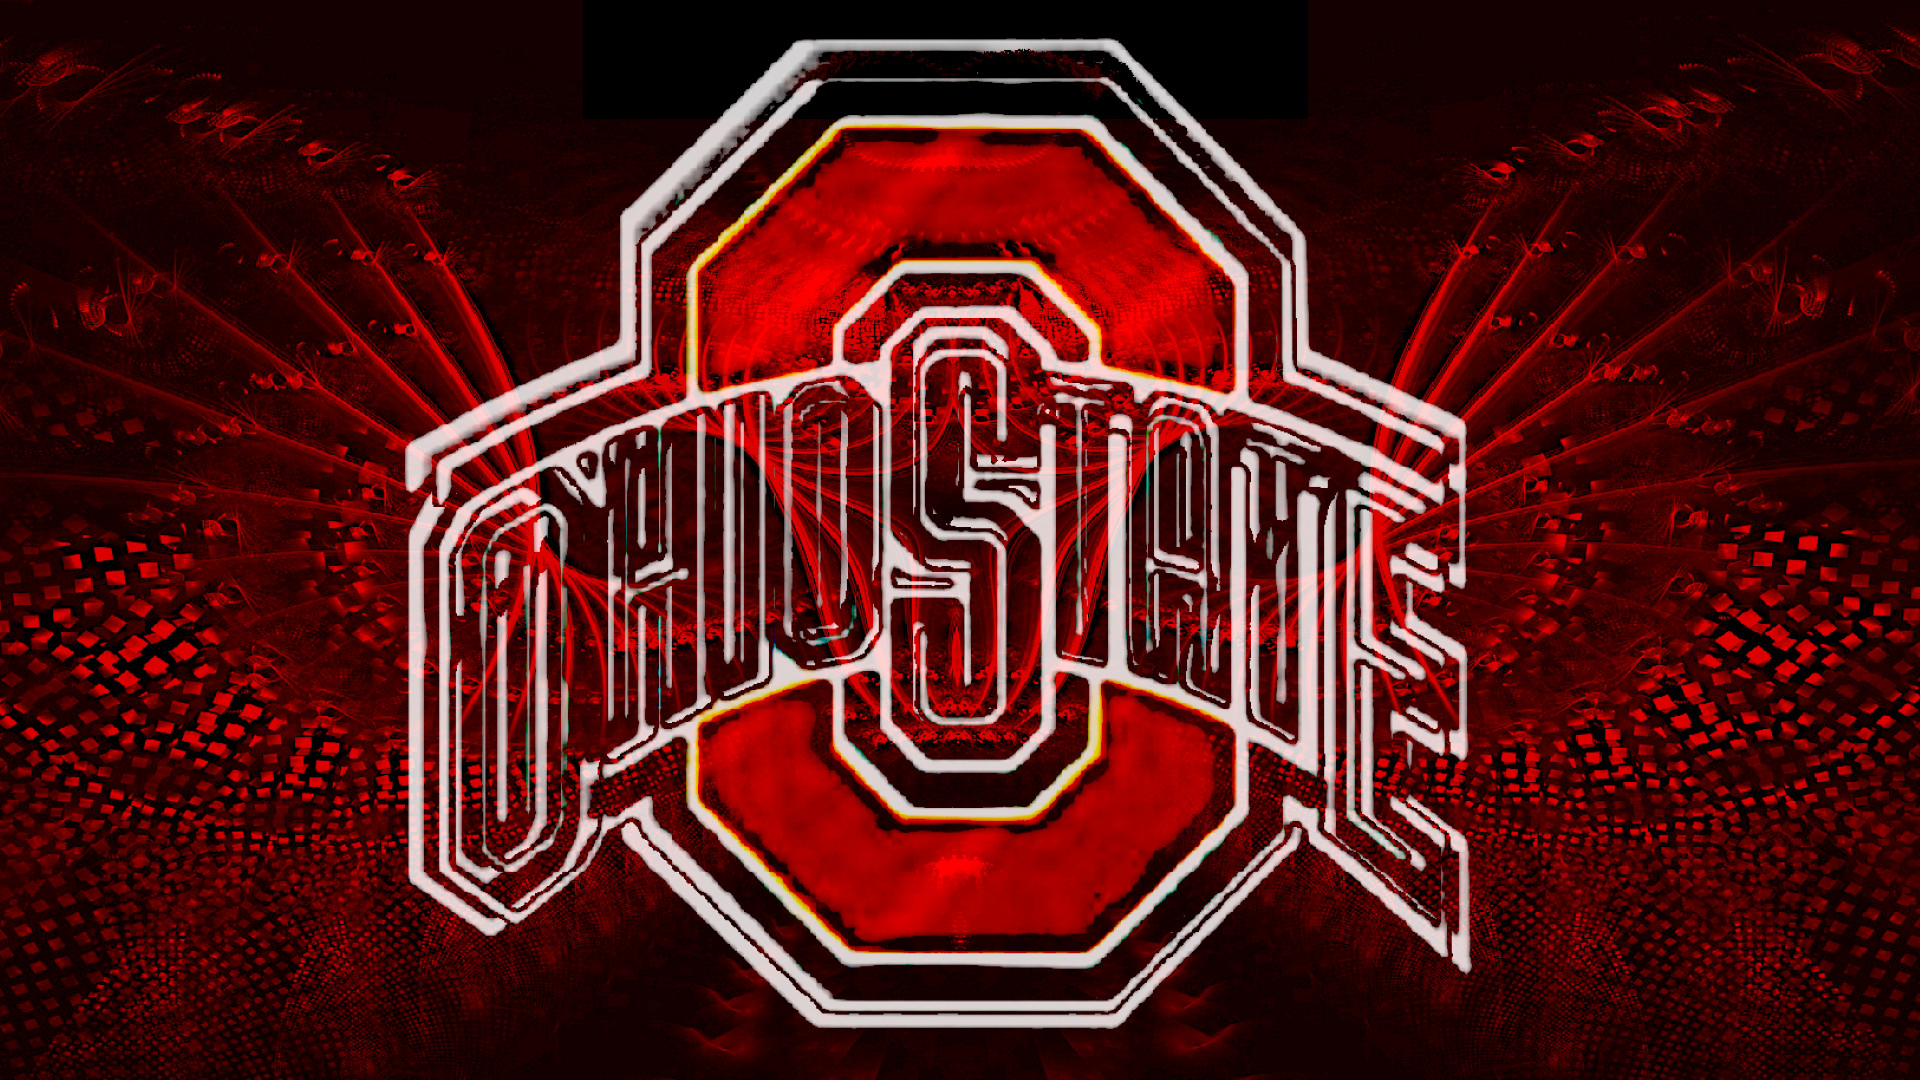 1920x1080 best images about OHIO STATE ipad Wallpapers on Pinterest | HD Wallpapers |  Pinterest | Hd wallpaper and Wallpaper